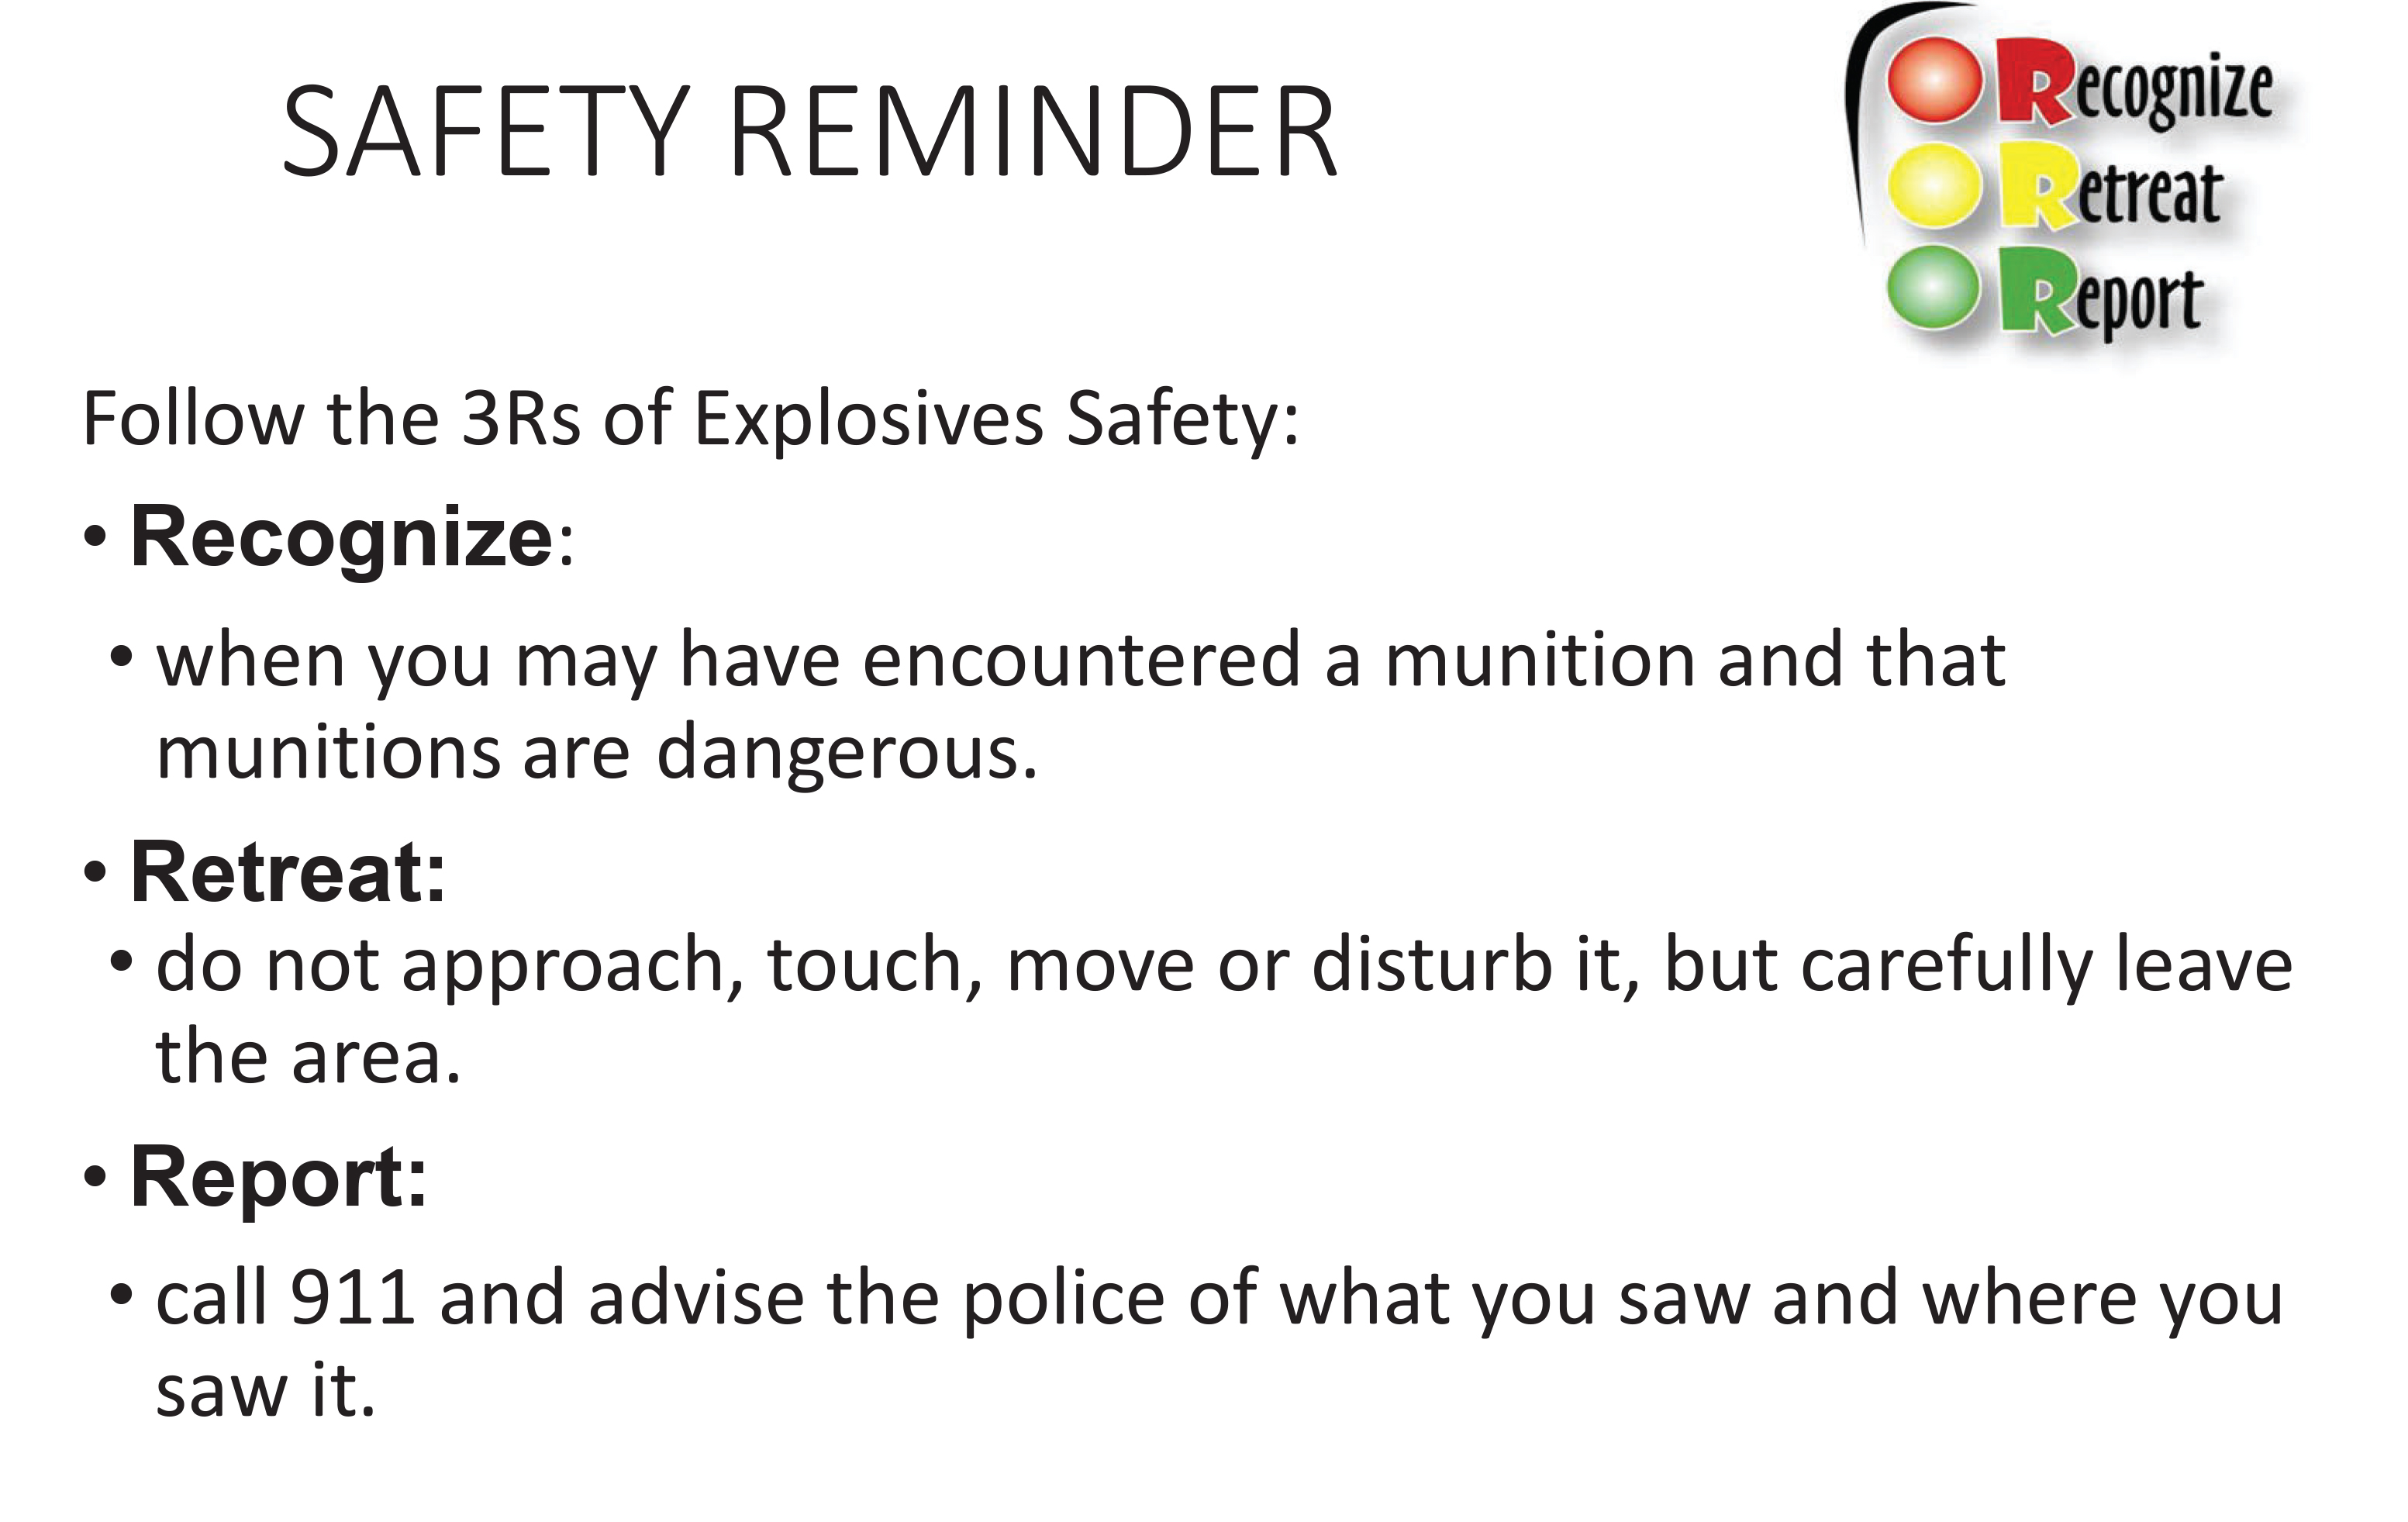 Three Rs of Explosives Safety: Recognize, Retreat, Report